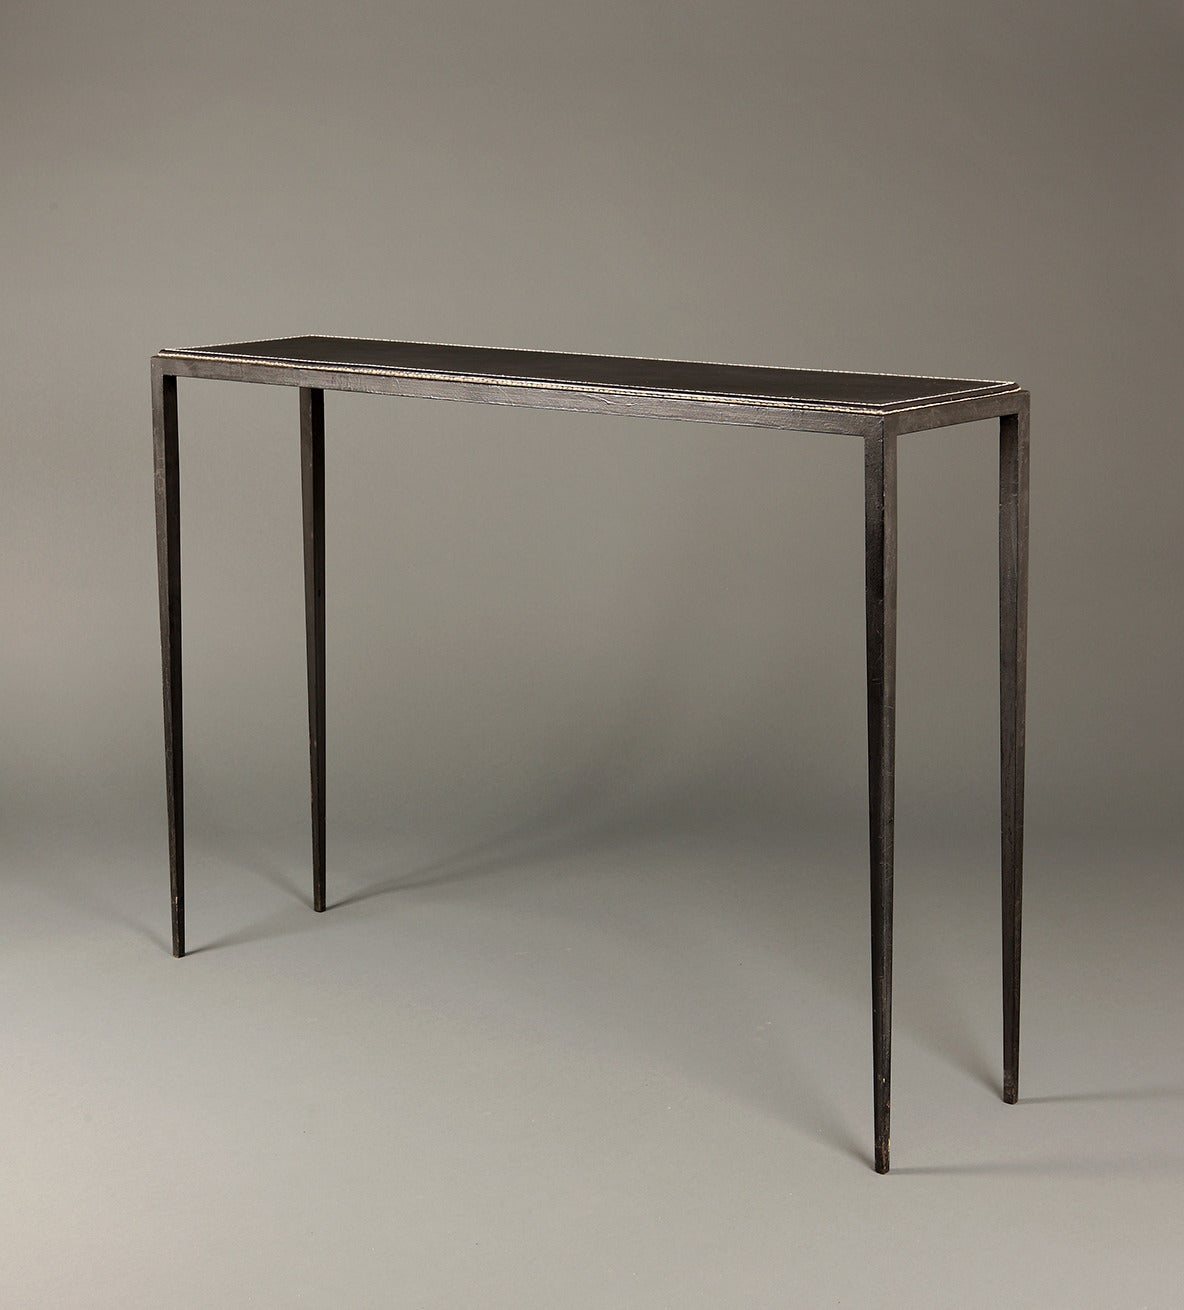 Console designed by Jean Michel Frank and made by Comte, Argentina. Metal frame and tapering legs. Leather covered table top with thick white contrast stitching. This console epitomises Jean Michel Frank's taste for luxurious materials and pureness